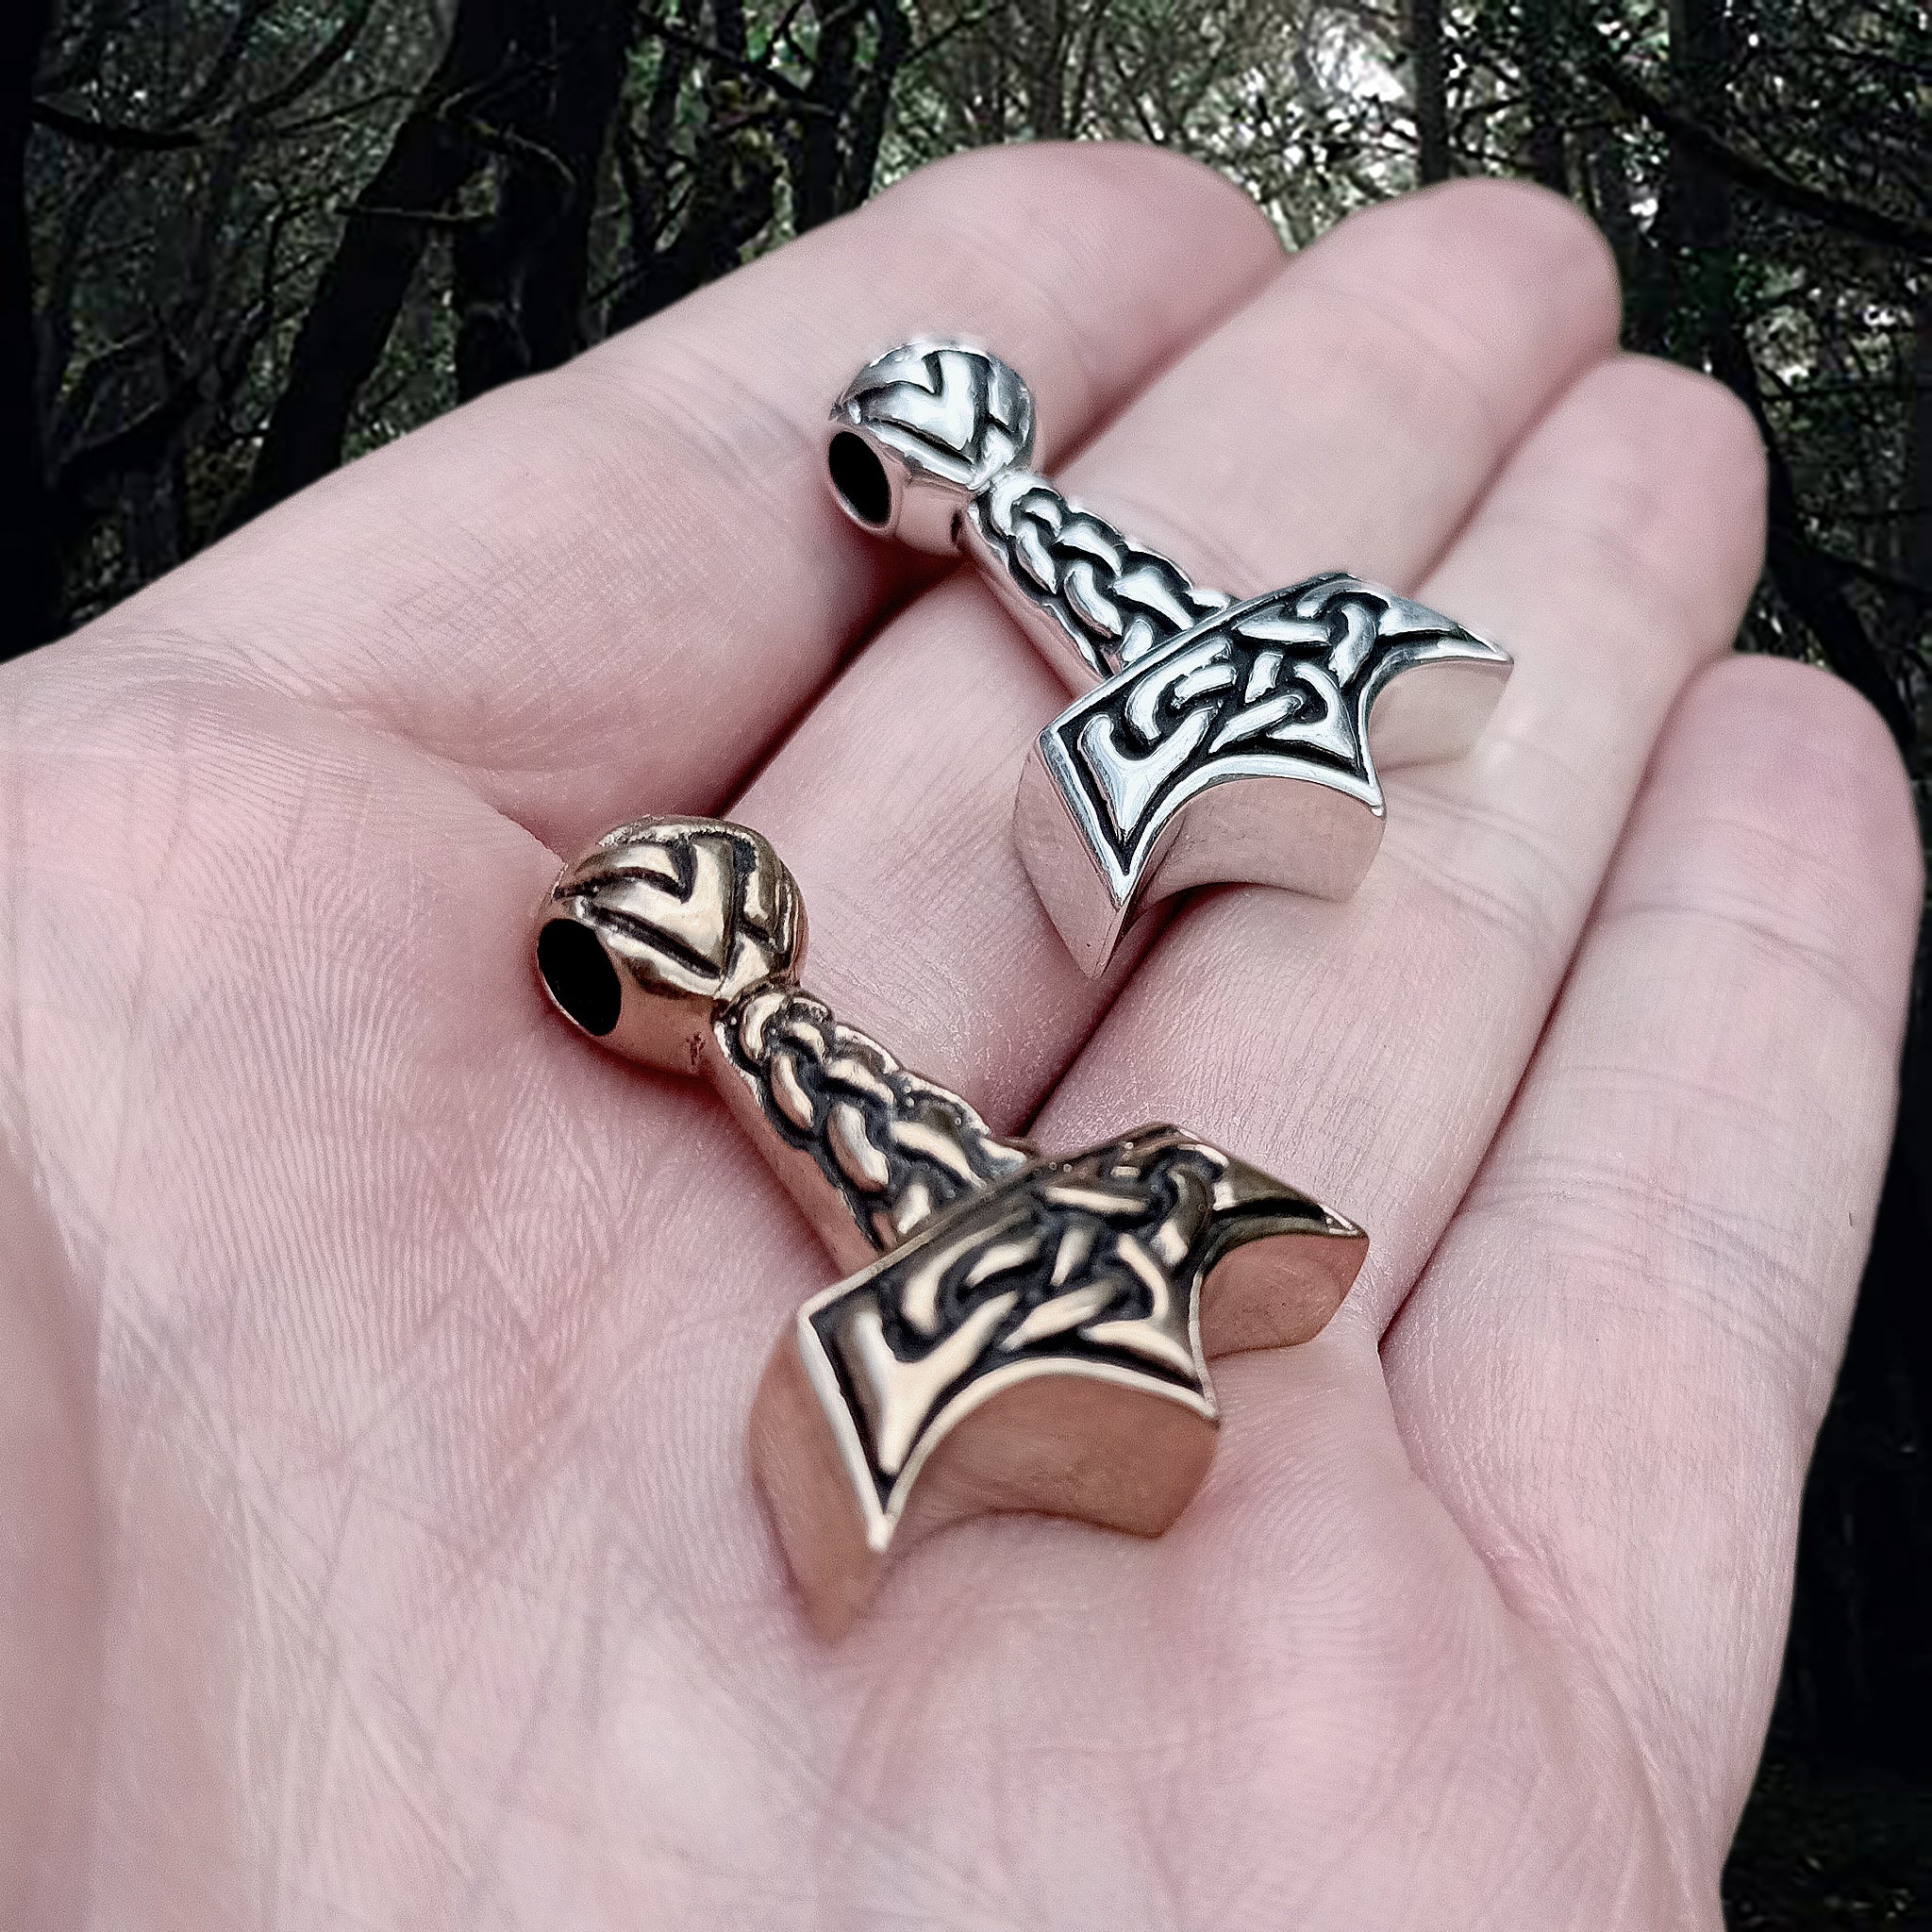 Knotwork Viking Thors Hammer Pendants in Bronze and Silver on Hand - Side Angle View